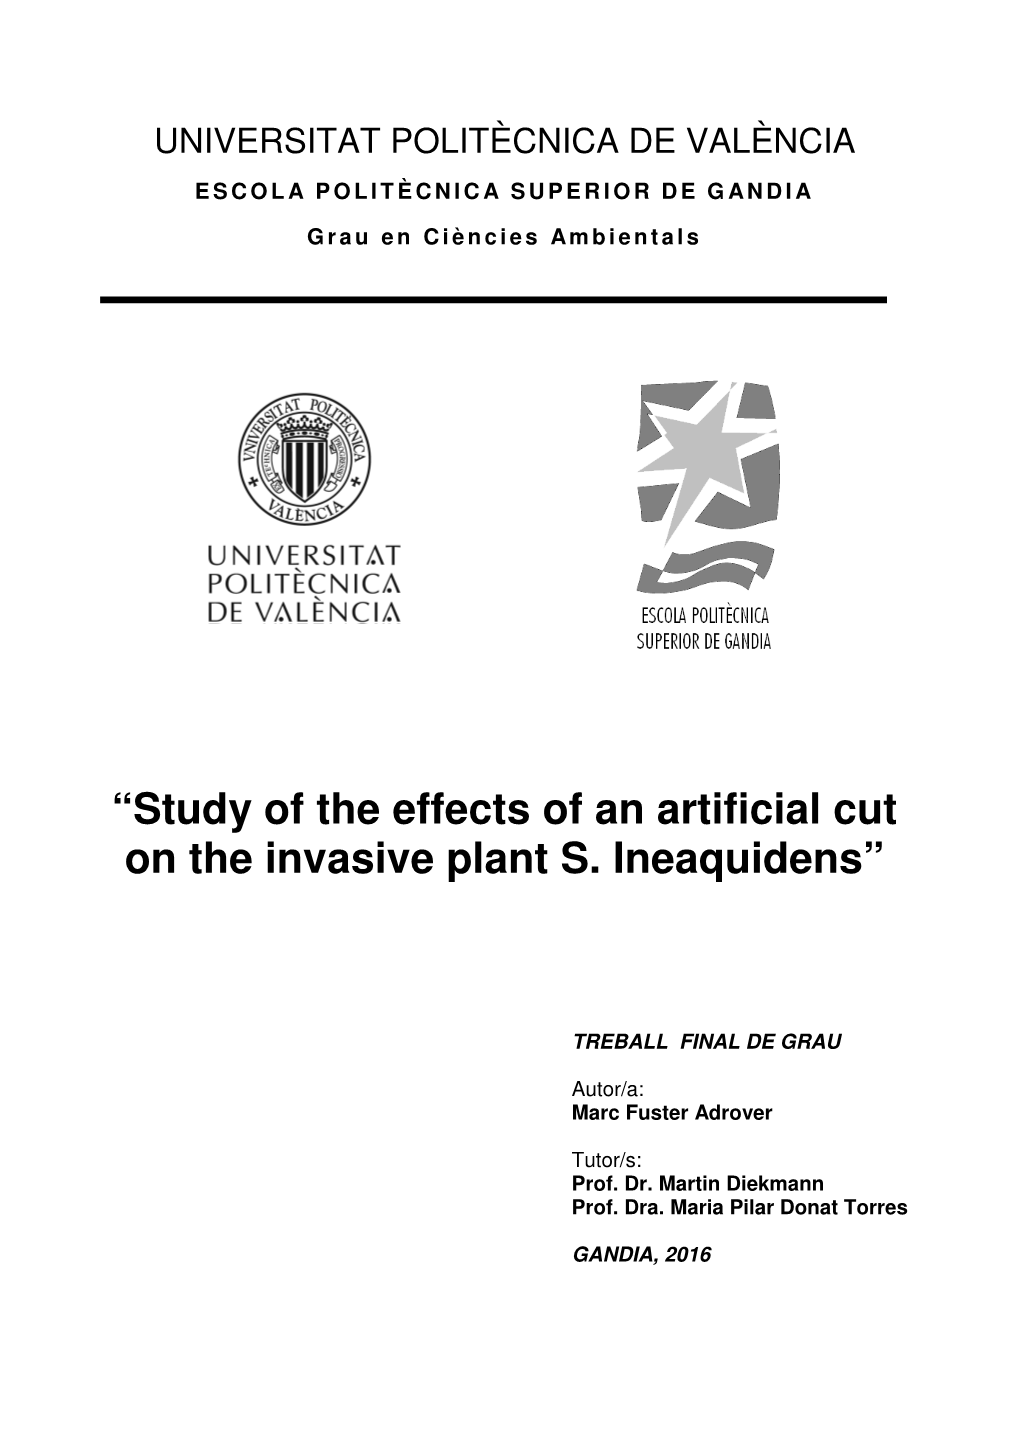 “Study of the Effects of an Artificial Cut on the Invasive Plant S. Ineaquidens”